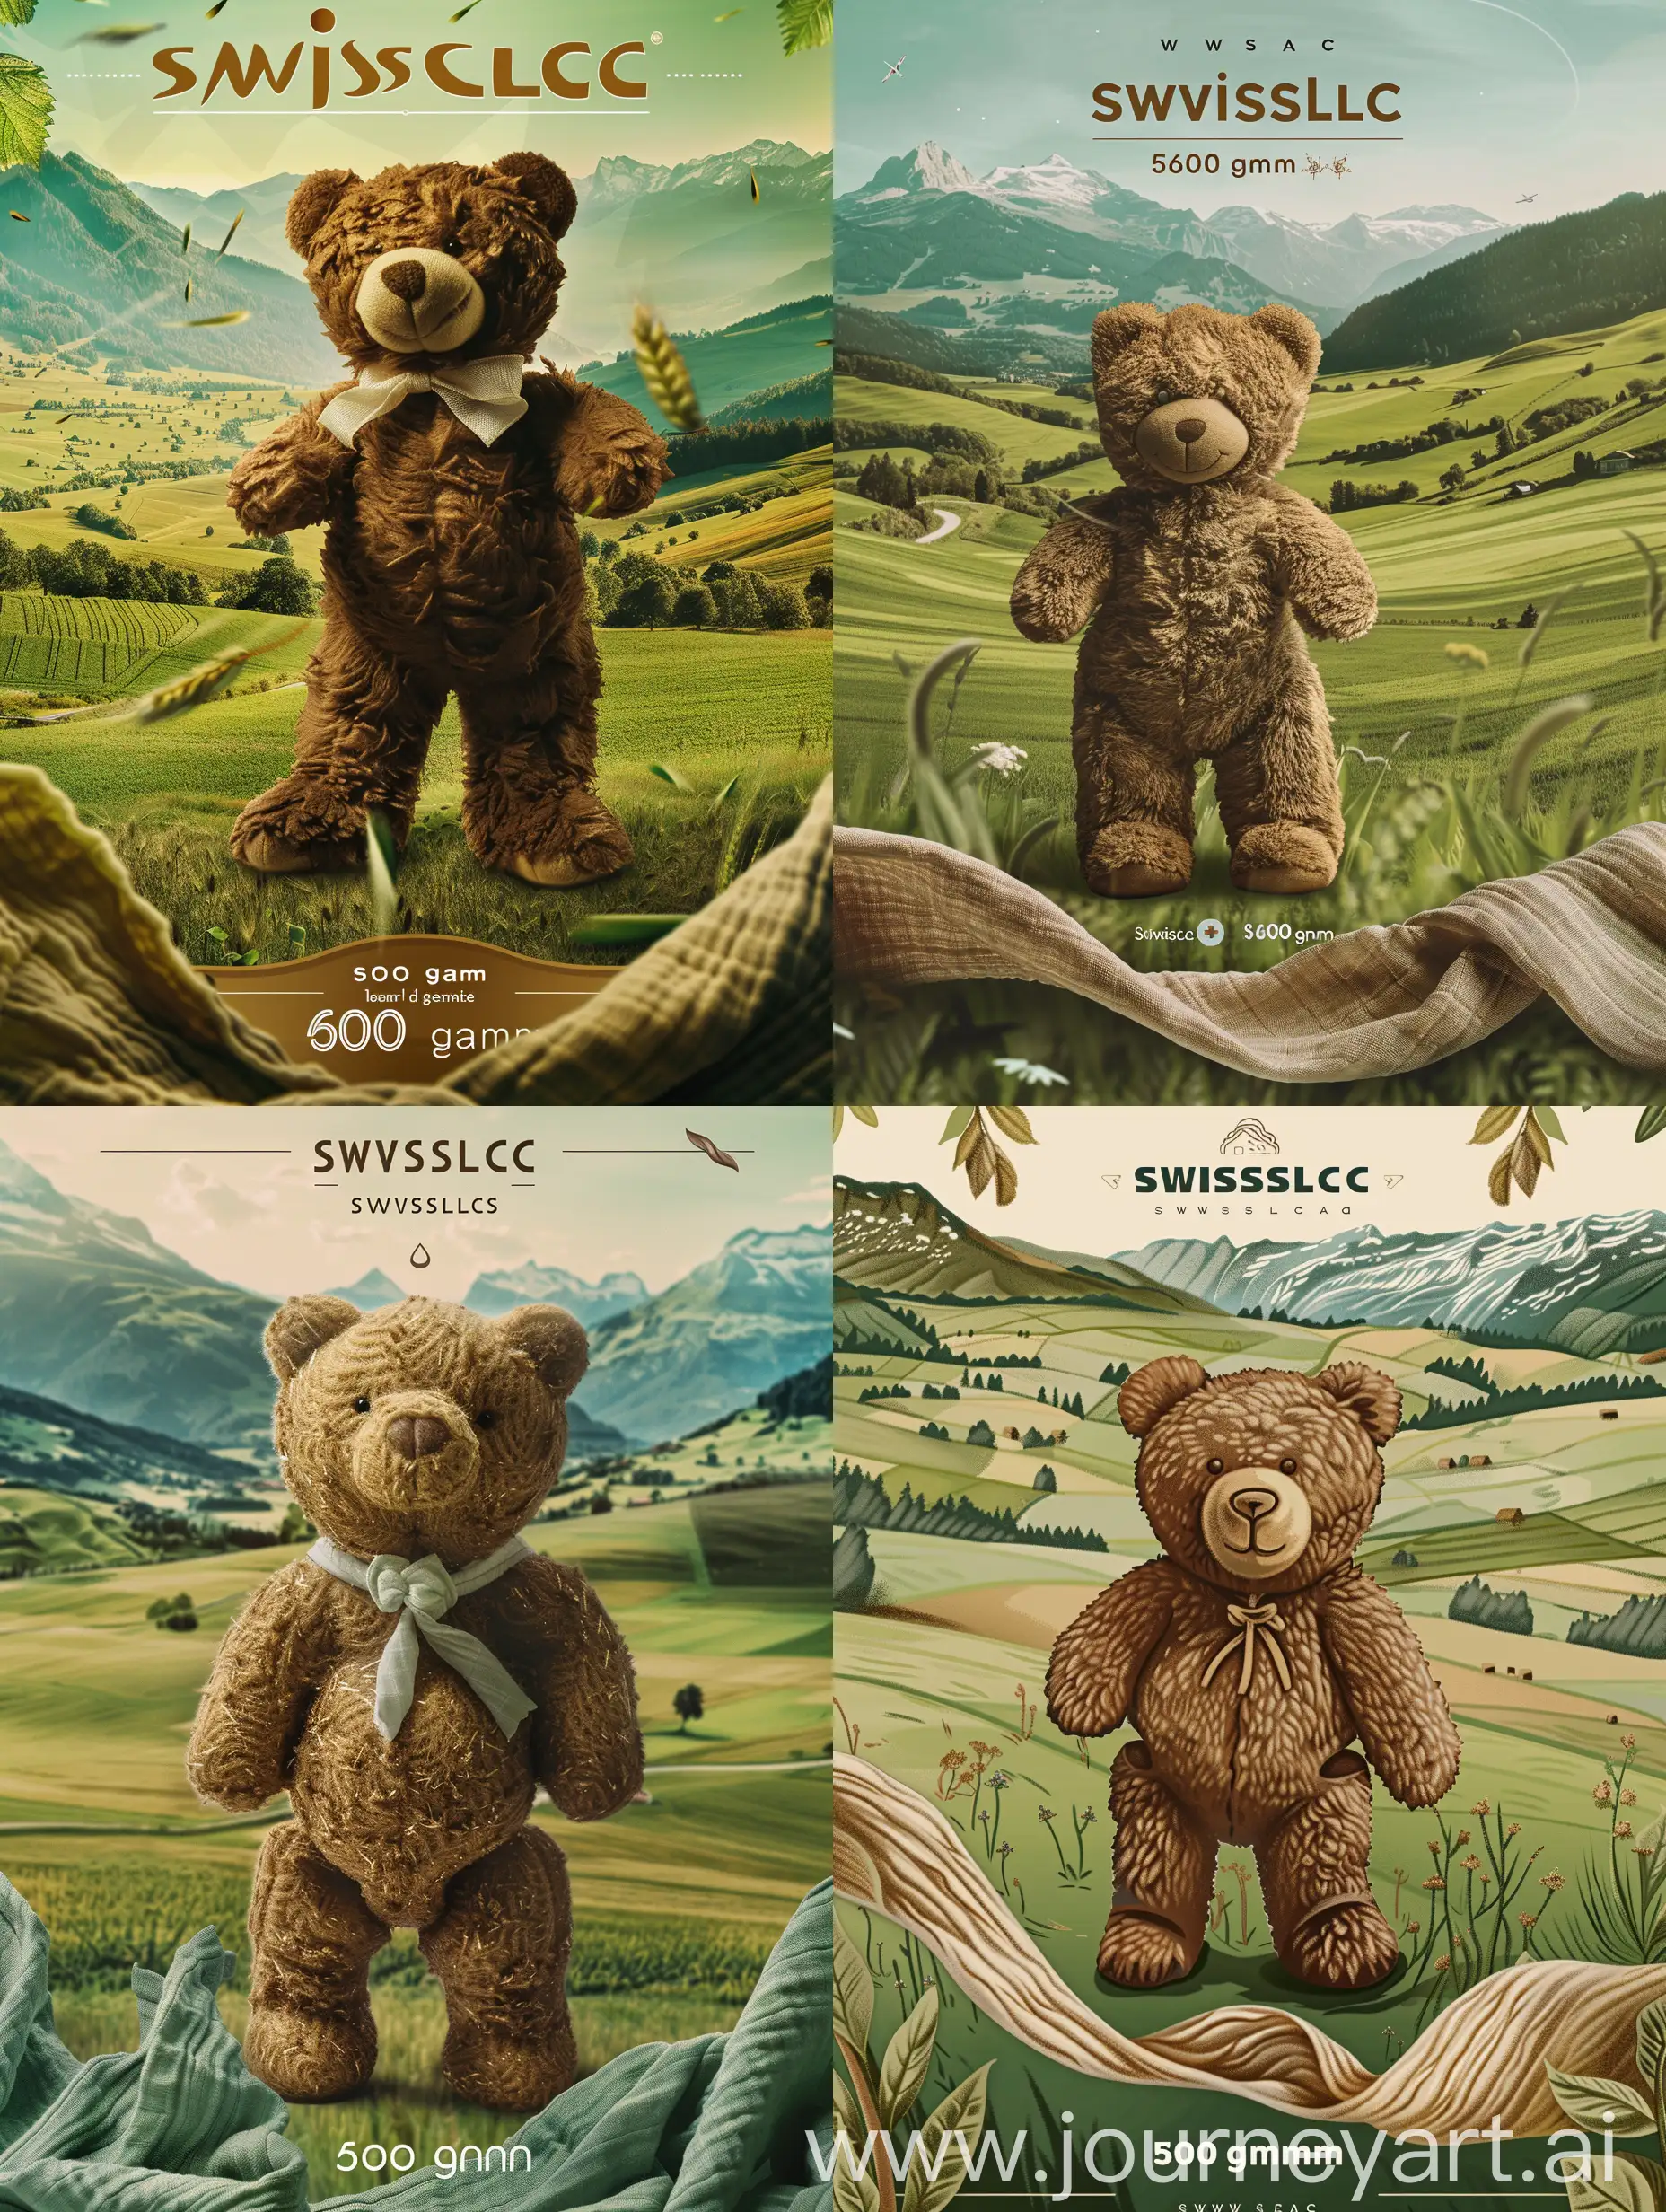 Packaging design for infant formula.Background: a teddy bear stands on a green meadow, with fields and mountains behind.Design elements: "swisslac" logo at the top, "600 gram" designation at the bottom, dynamic linen near the bear